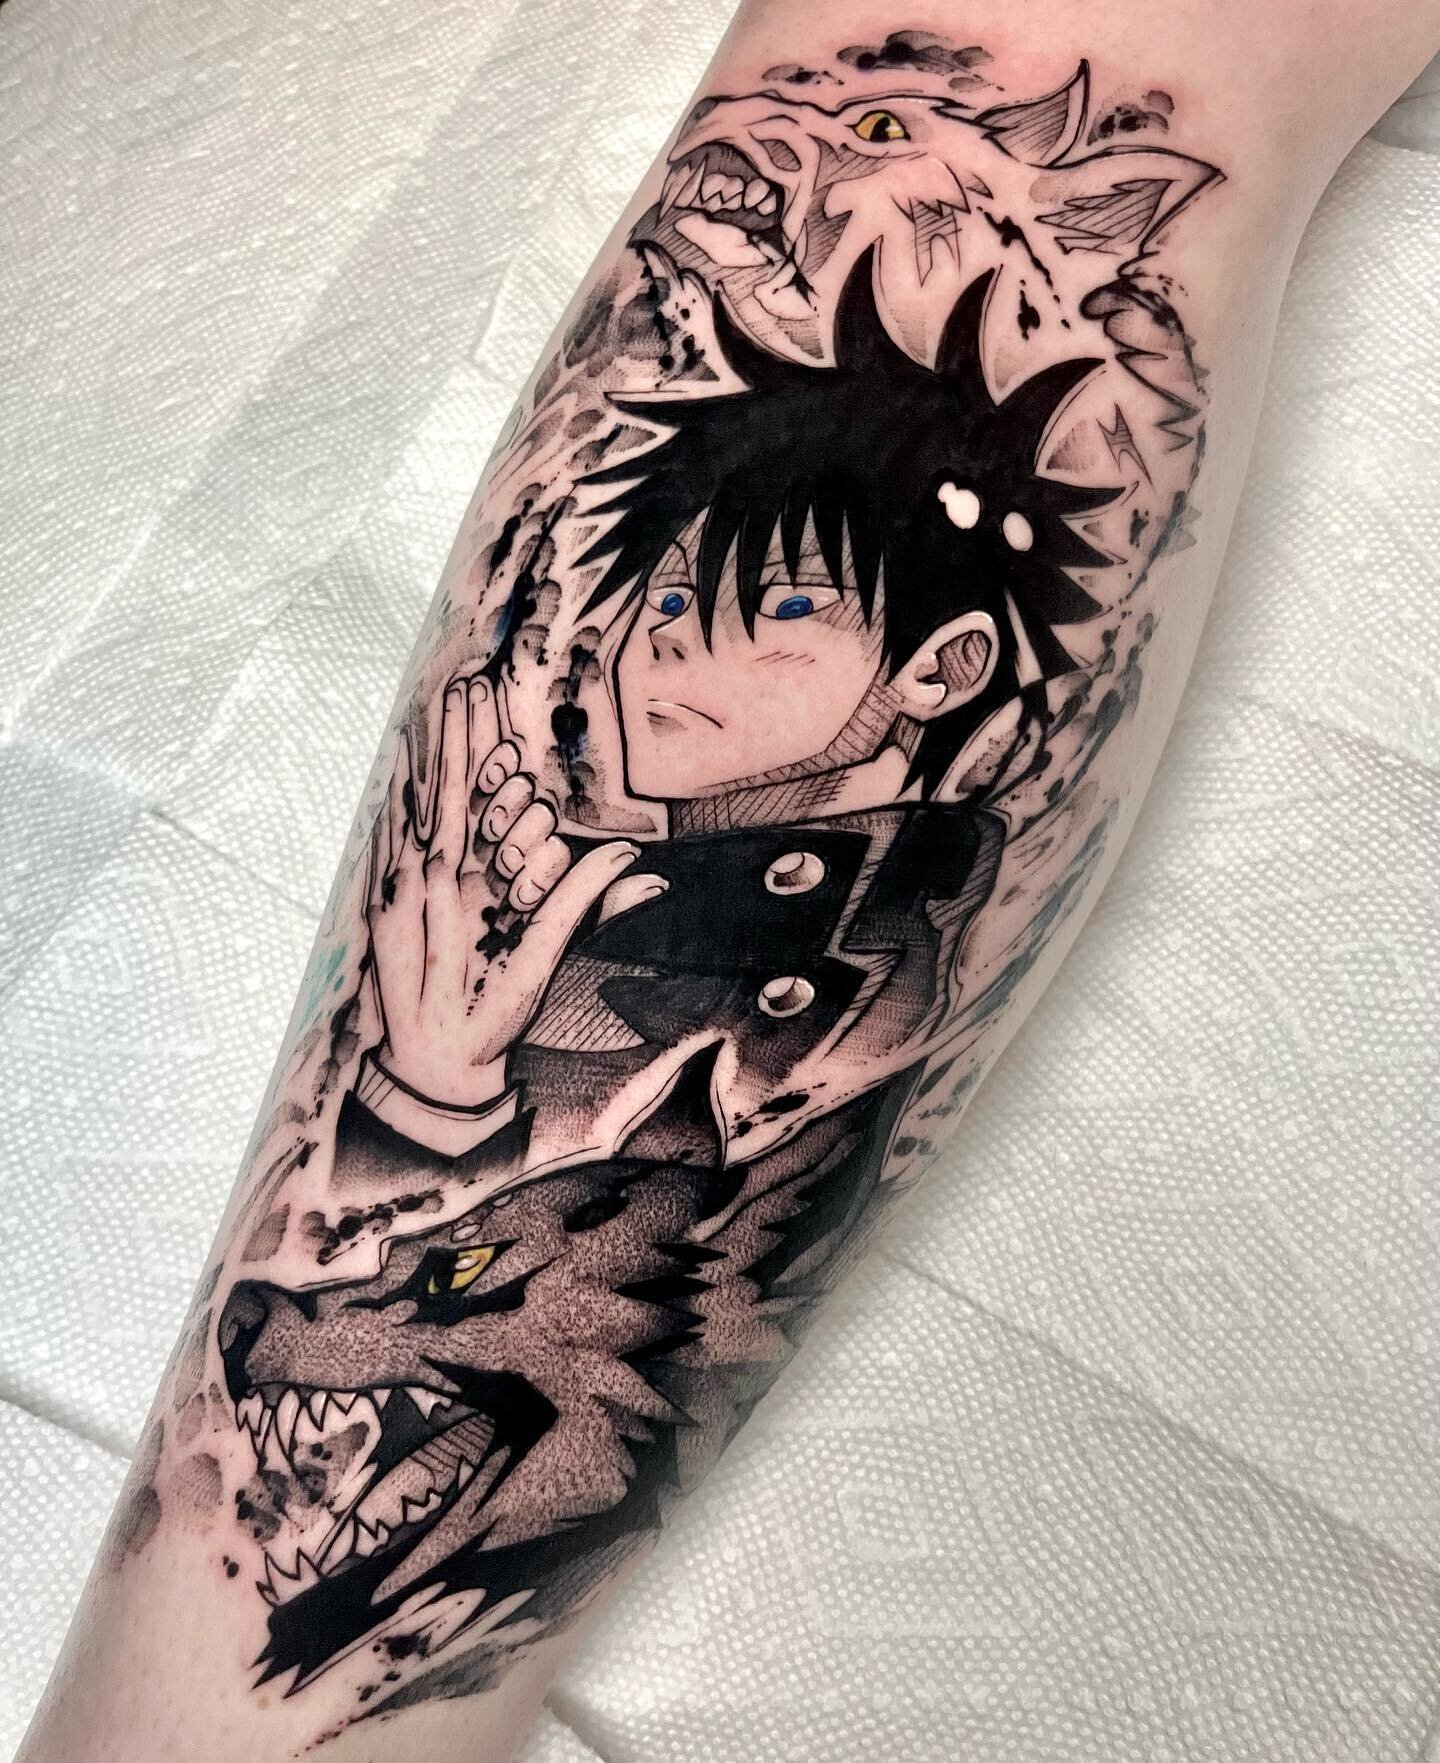 Megumi Fushiguro of JJK and his divine dogs has gotta be my favorite character from this show. We started tying this one into an older Sukuna/Gojo tattoo which is the most satisfying feeling! Thank you again @emilylaitola for sitting like an absolute